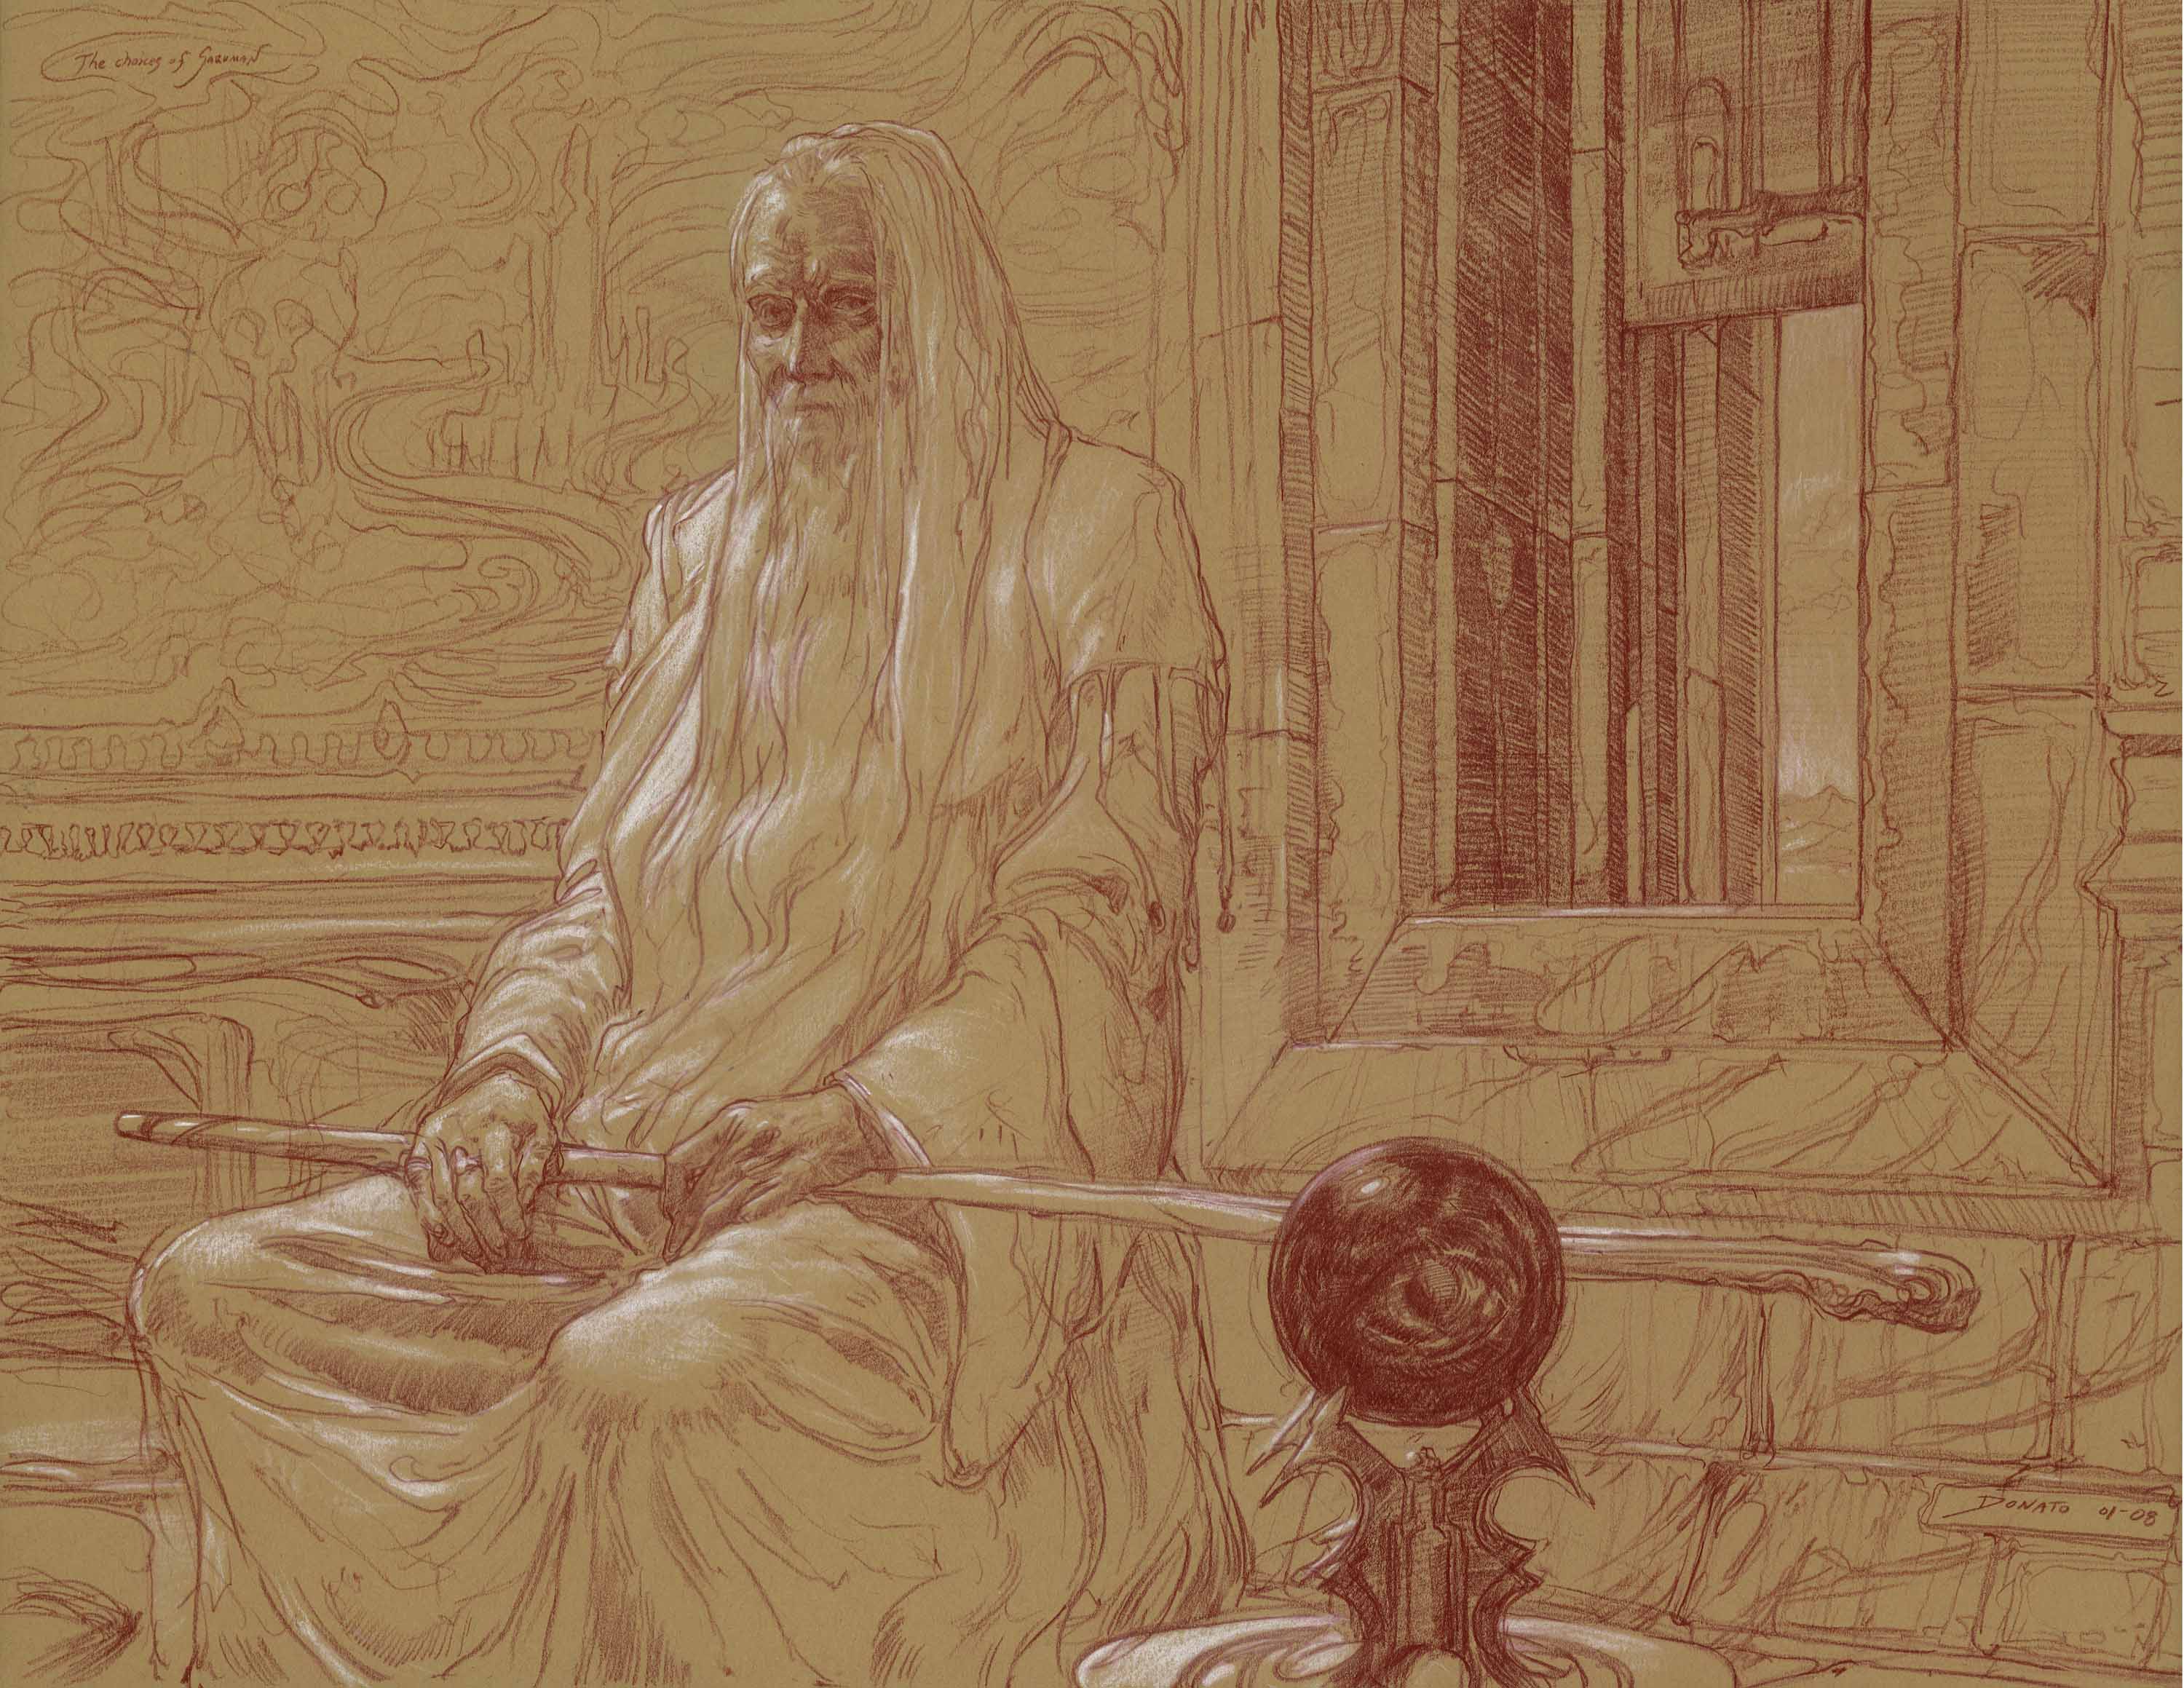 The Choice of Saruman
11" x14"  Watercolor Pencil and Chalk on Toned paper 2008
Greisinger collection